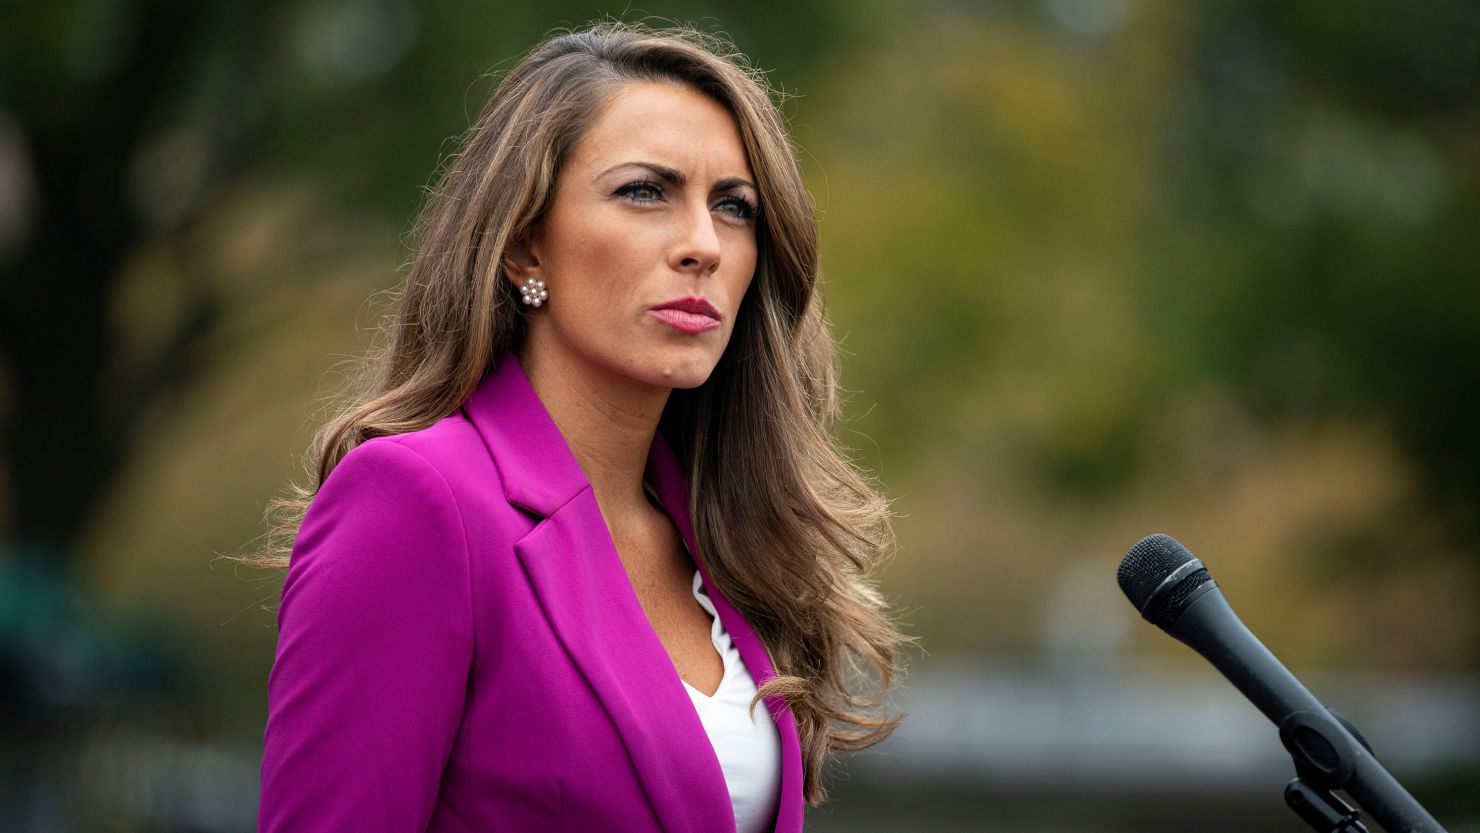 White House Director of Strategic Communications Alyssa Farah Griffin speaks to reporters following a television interview outside the White House in Washington on October 21, 2020. 